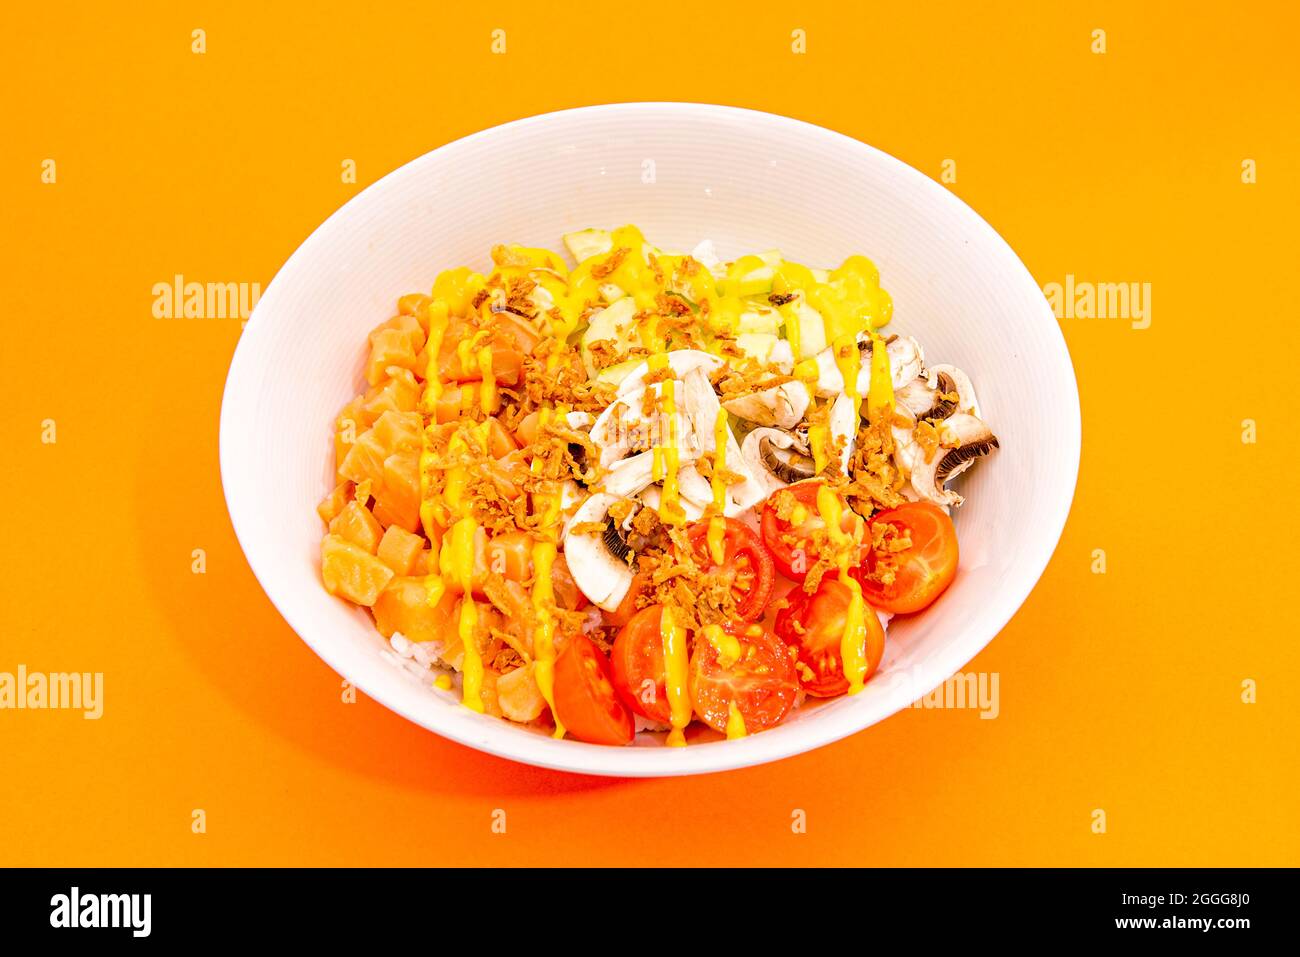 White poke bowl with marinated salmon, pieces of cherry tomatoes, rolled mushrooms, fried onion, cucumber and white rice on orange table Stock Photo